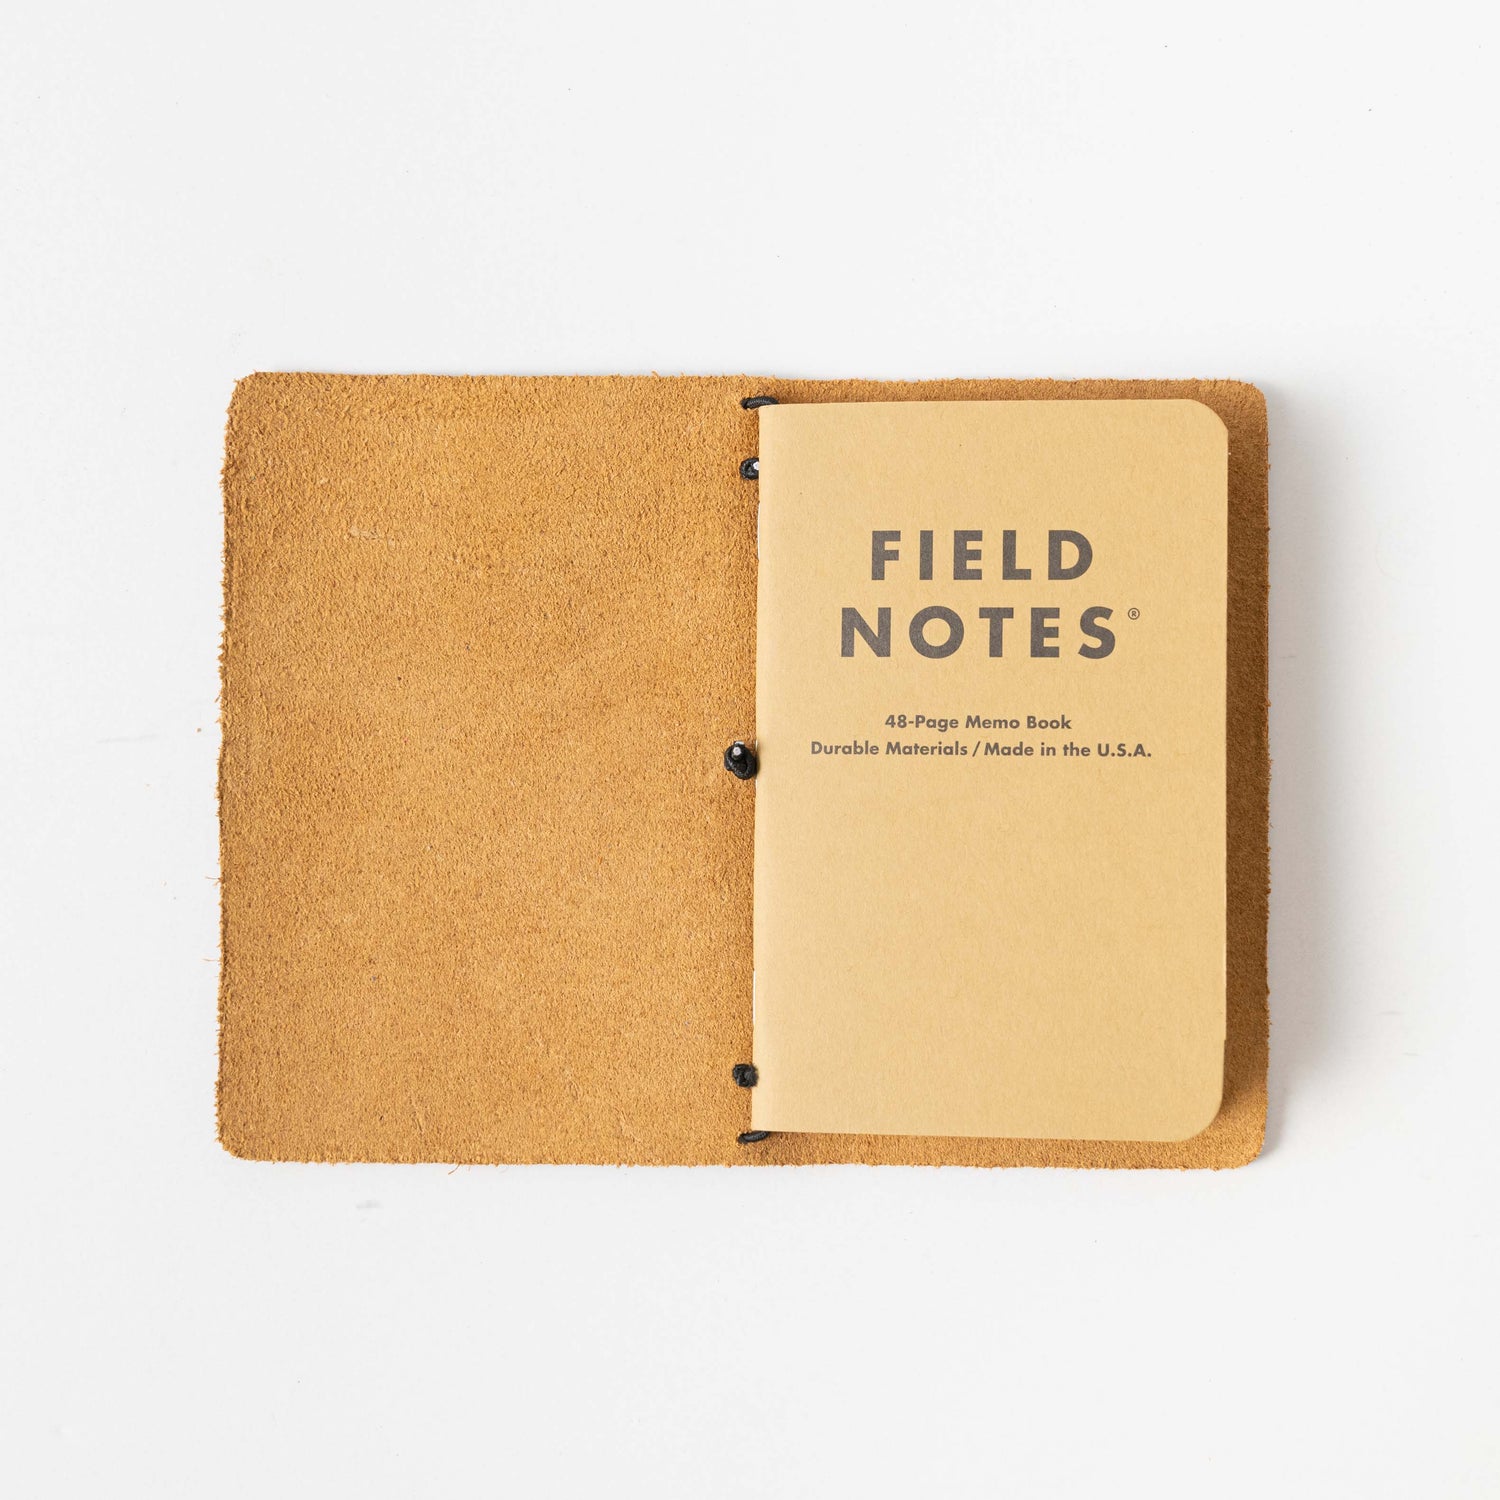 Oxblood Travel Notebook- leather journal - leather notebook - KMM &amp; Co.